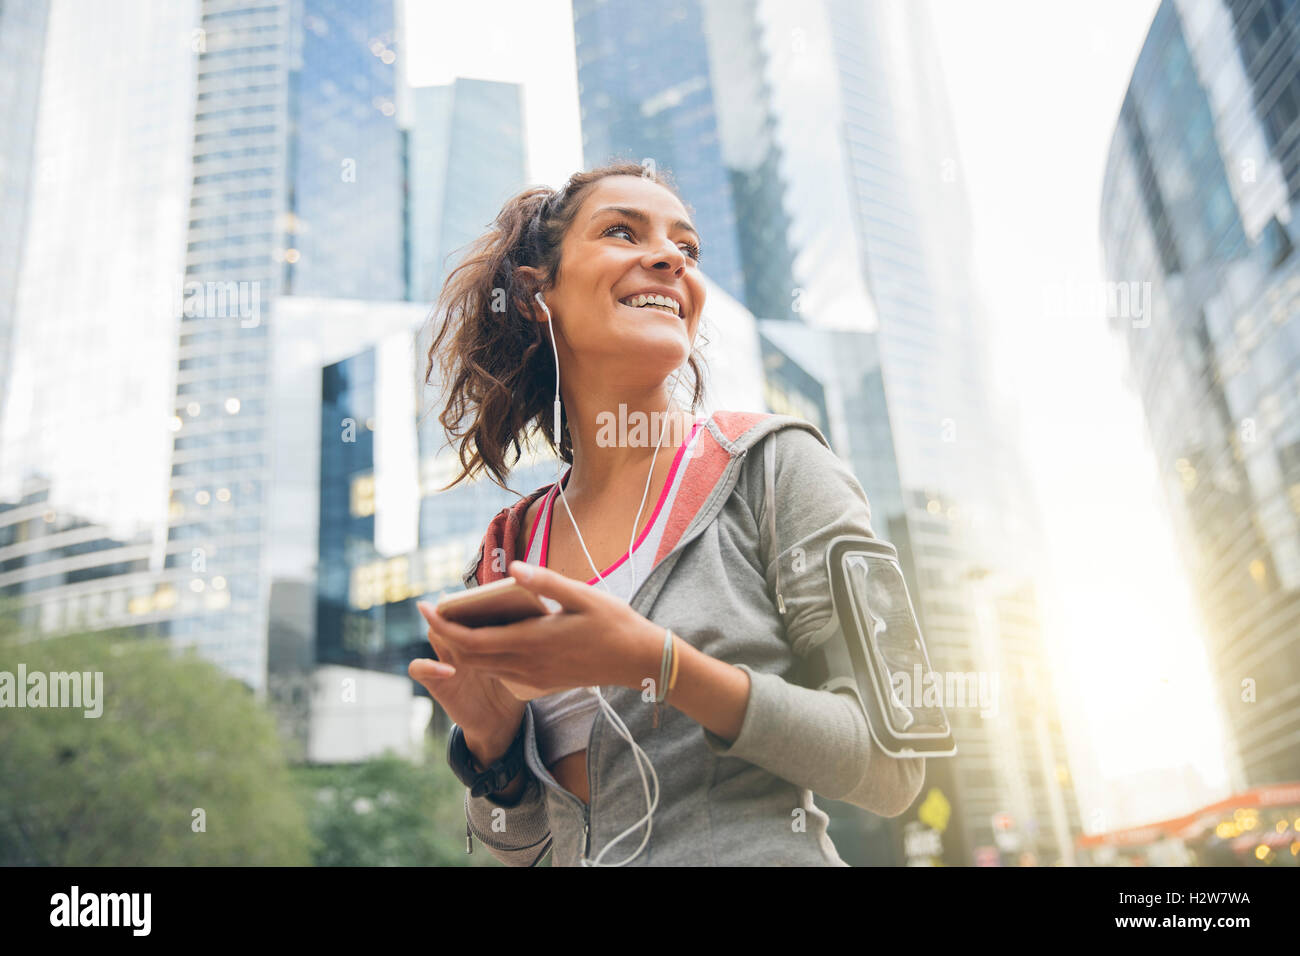 Young woman runner wearing armband and listening to music on earphones Stock Photo